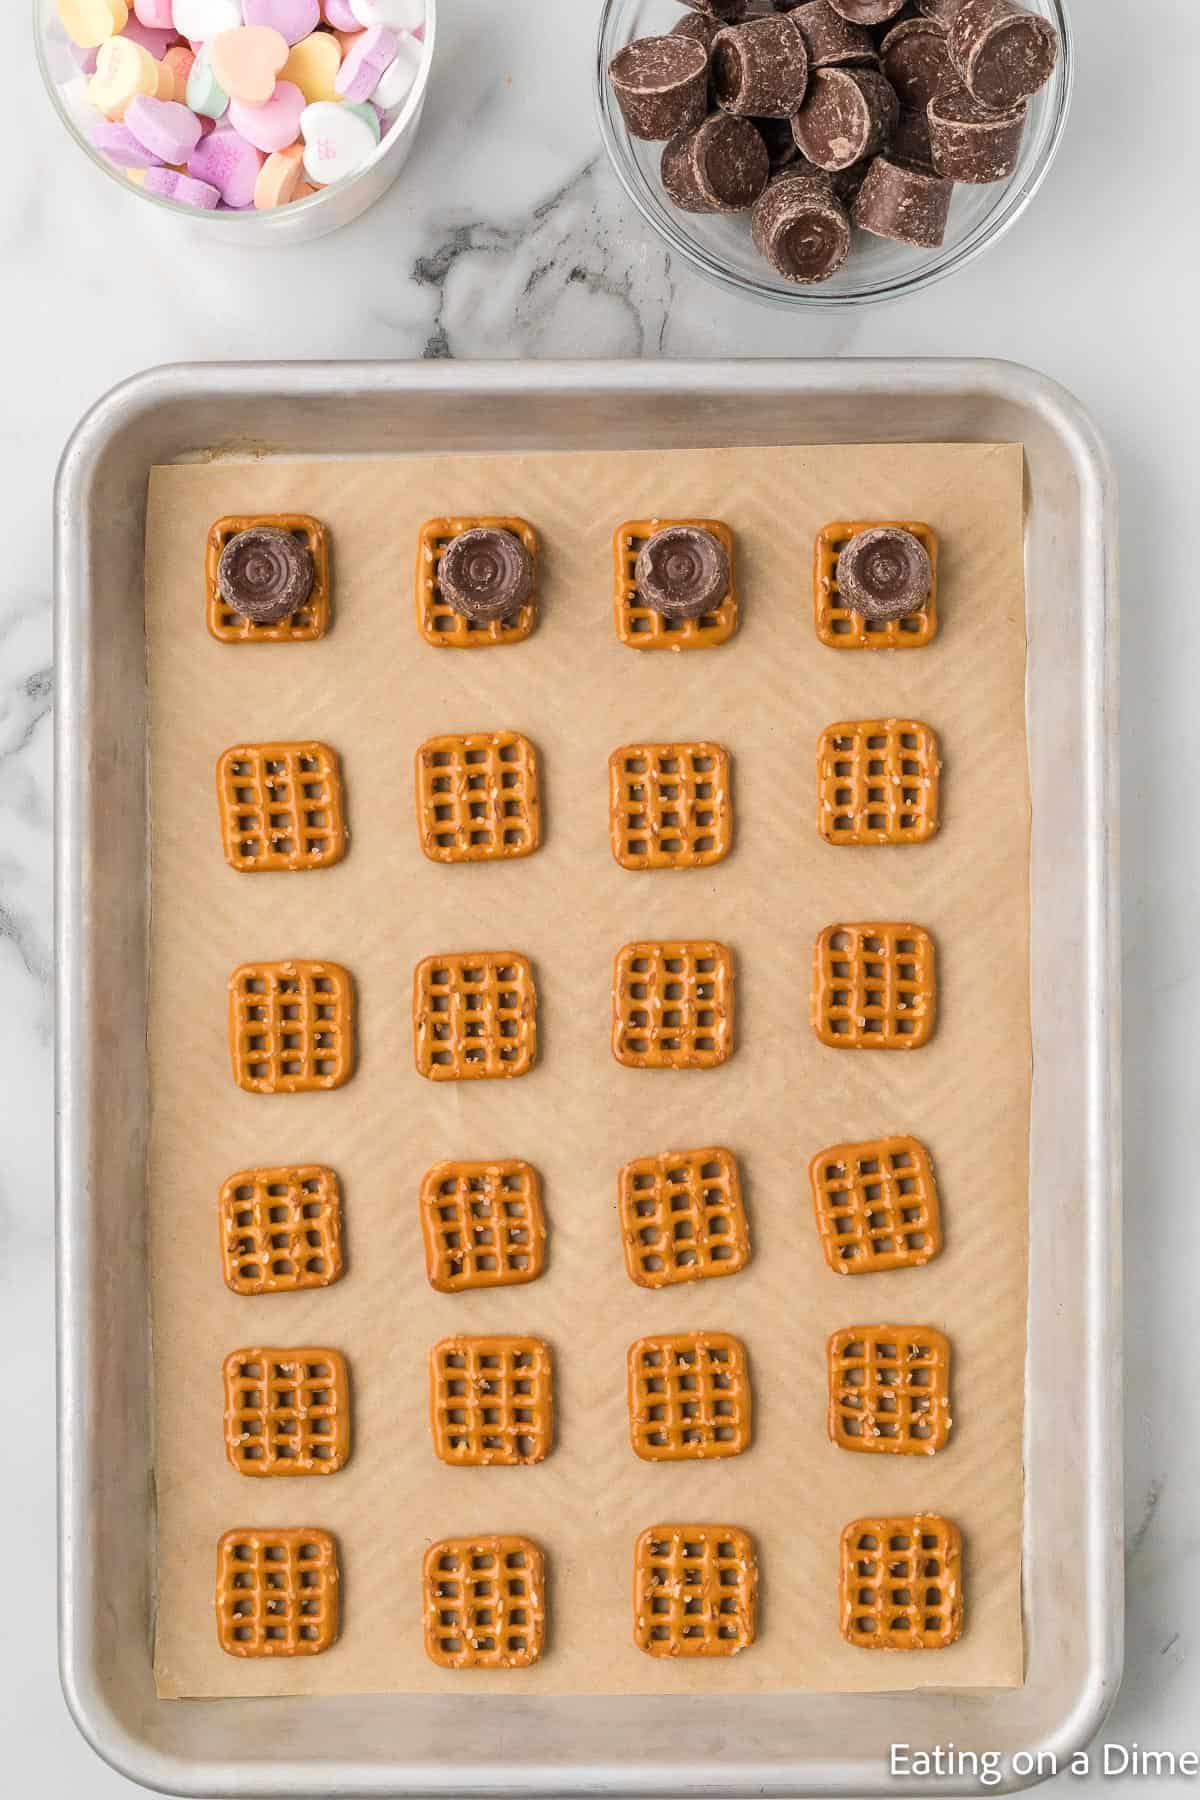 Placing the pretzels on a baking sheet and topping with Rolo Candy